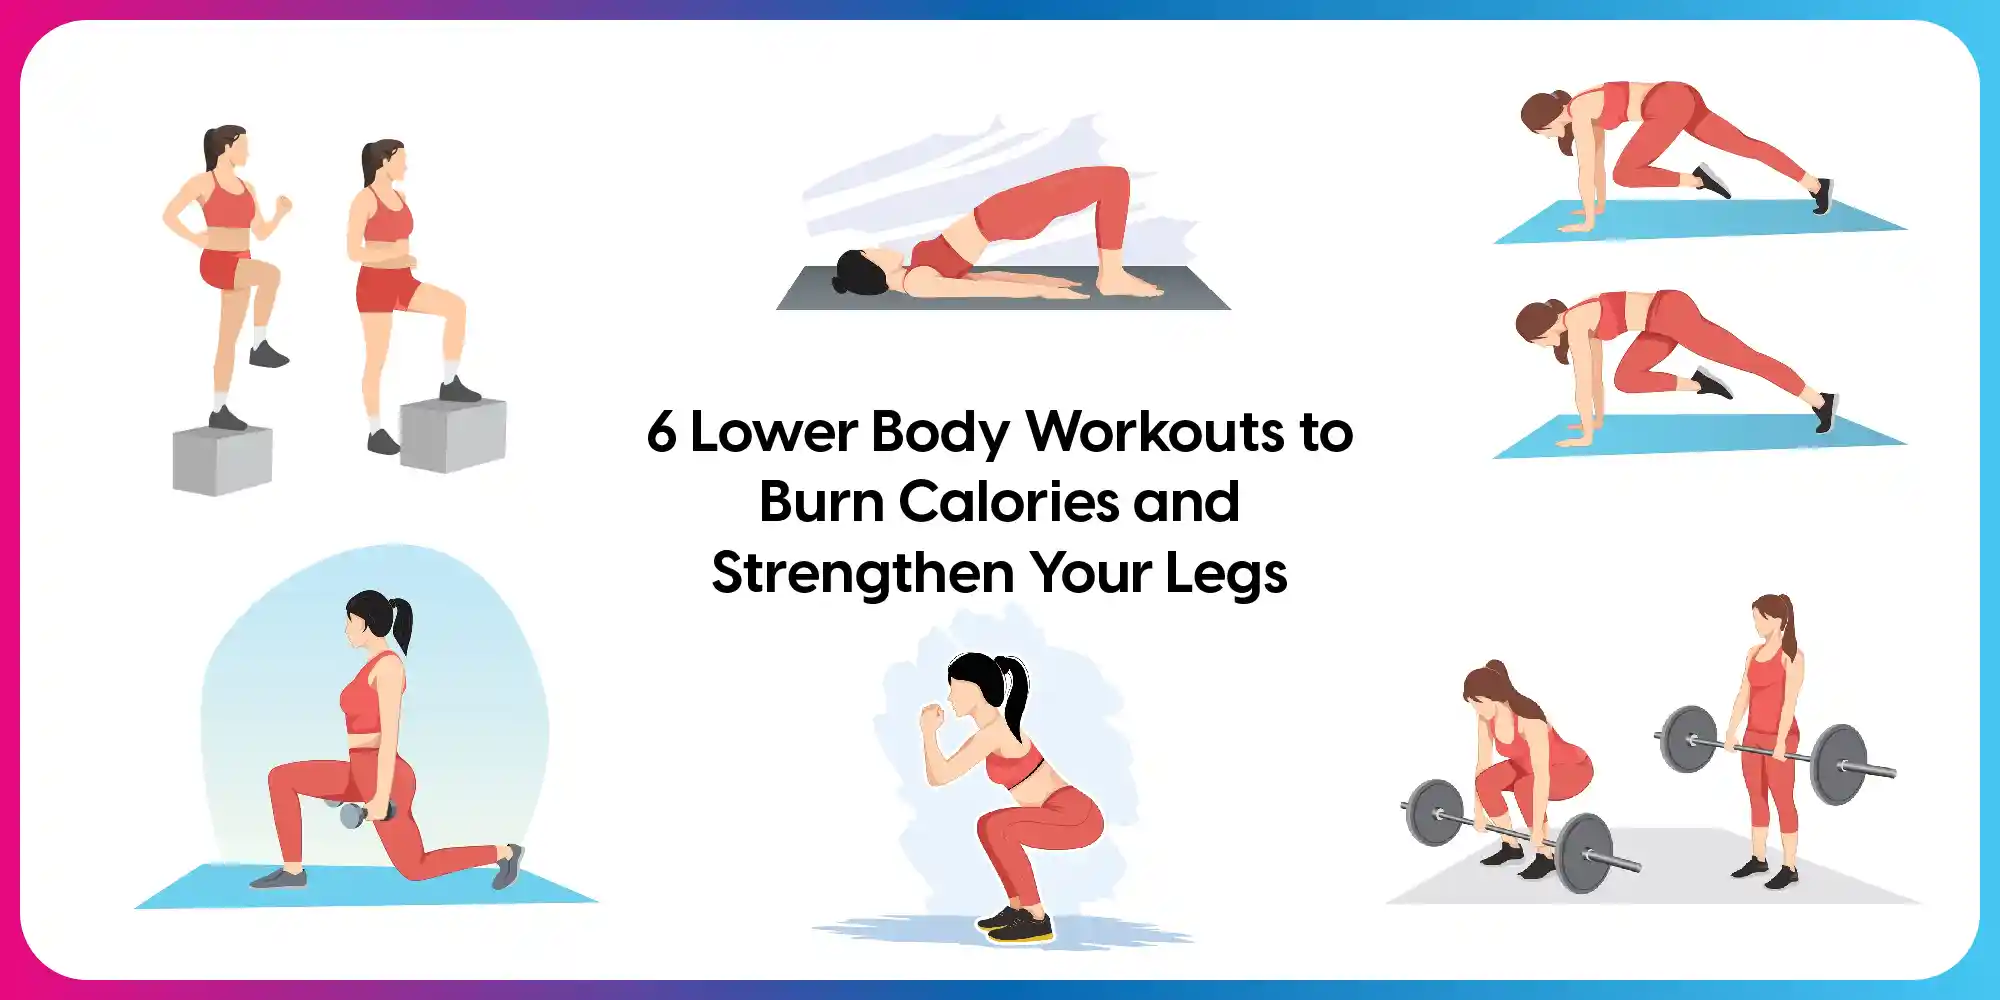 6 Lower Body Workouts to Burn Calories and Strengthen Your Legs - Fitterfly